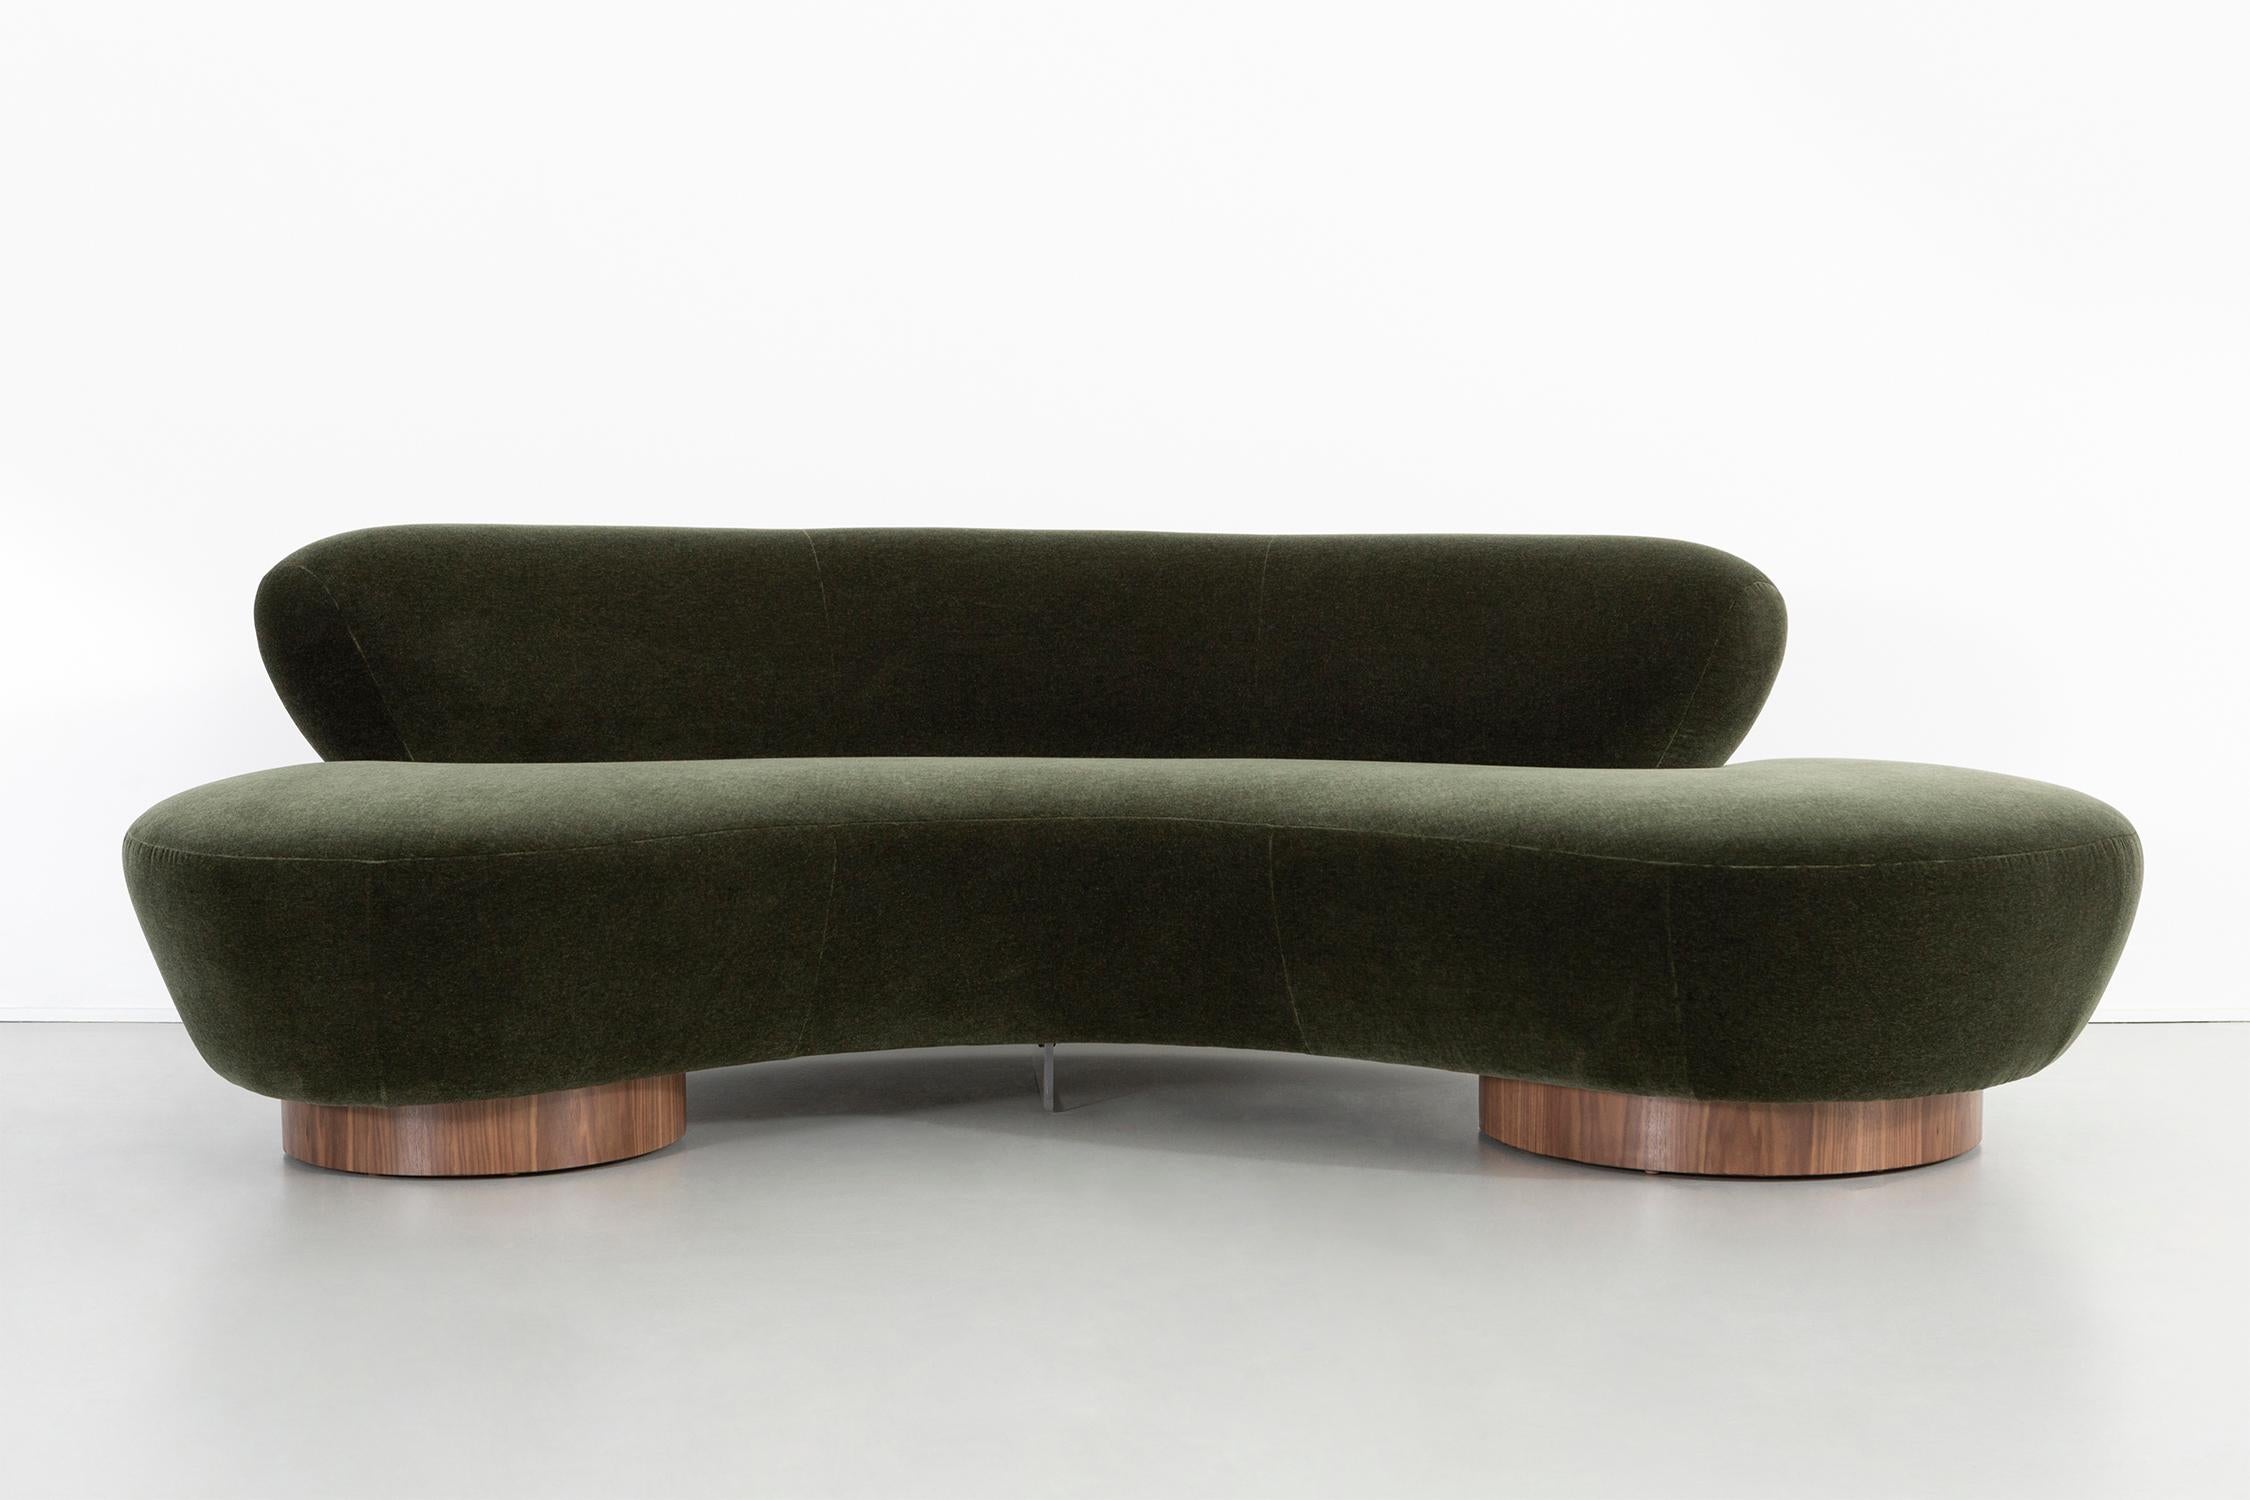 Cloud sofa

designed by Vladimir Kagan for Directional 

USA, circa 1970s

Freshly reupholstered in mohair, walnut and Lucite 

Measures: 28 ¾” H x 93 ¾” W x 49 ½” D x seat 18 ?” H

Fabric sample available upon request.